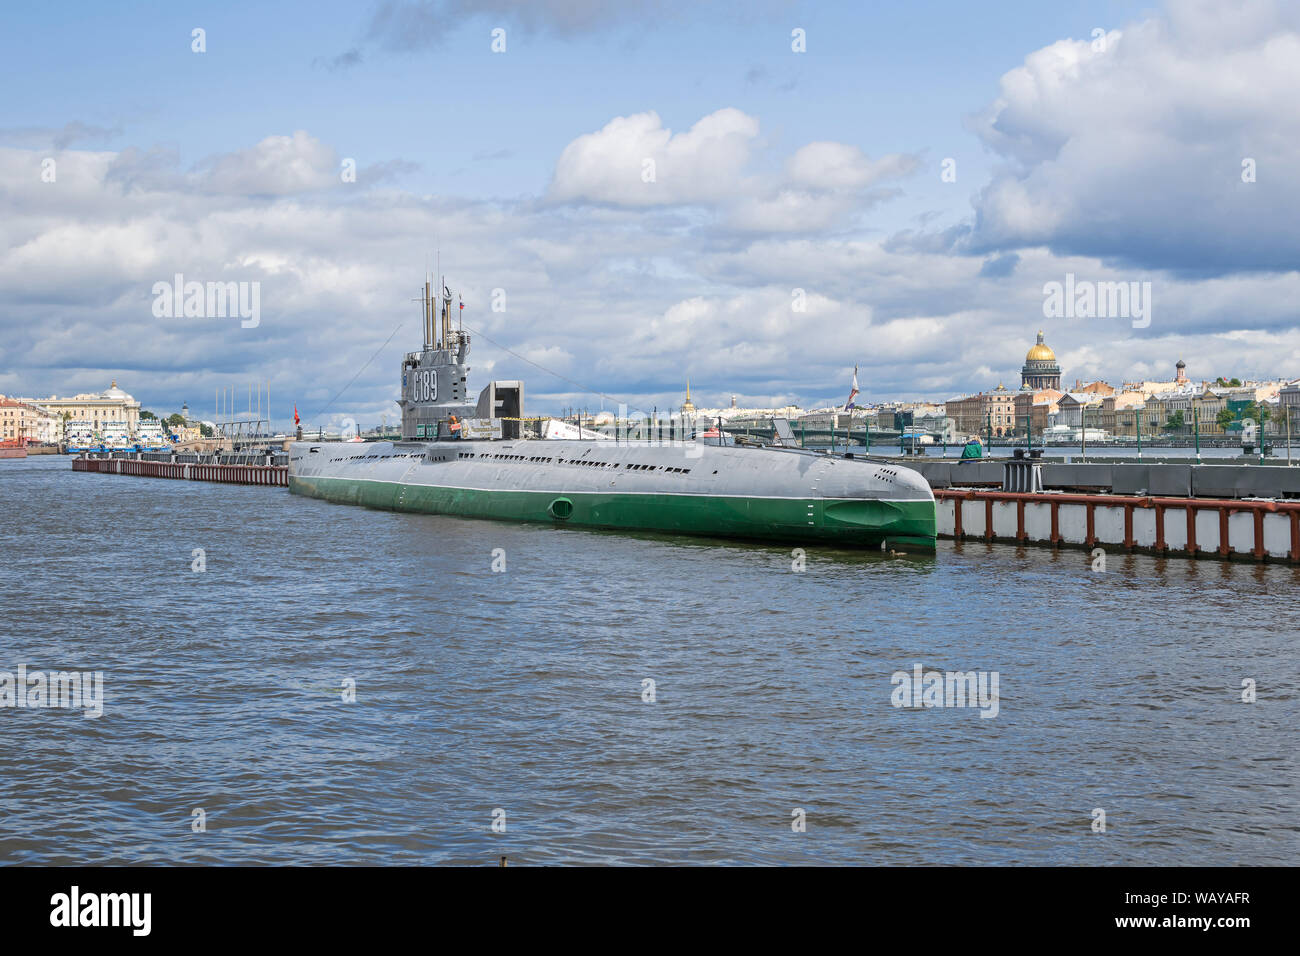 Saint Petersburg, Russia -  August 3, 2019: Open to the public museum ship Soviet submarine C-189 (S-189), a 613-class diesel-electric submarine ancho Stock Photo